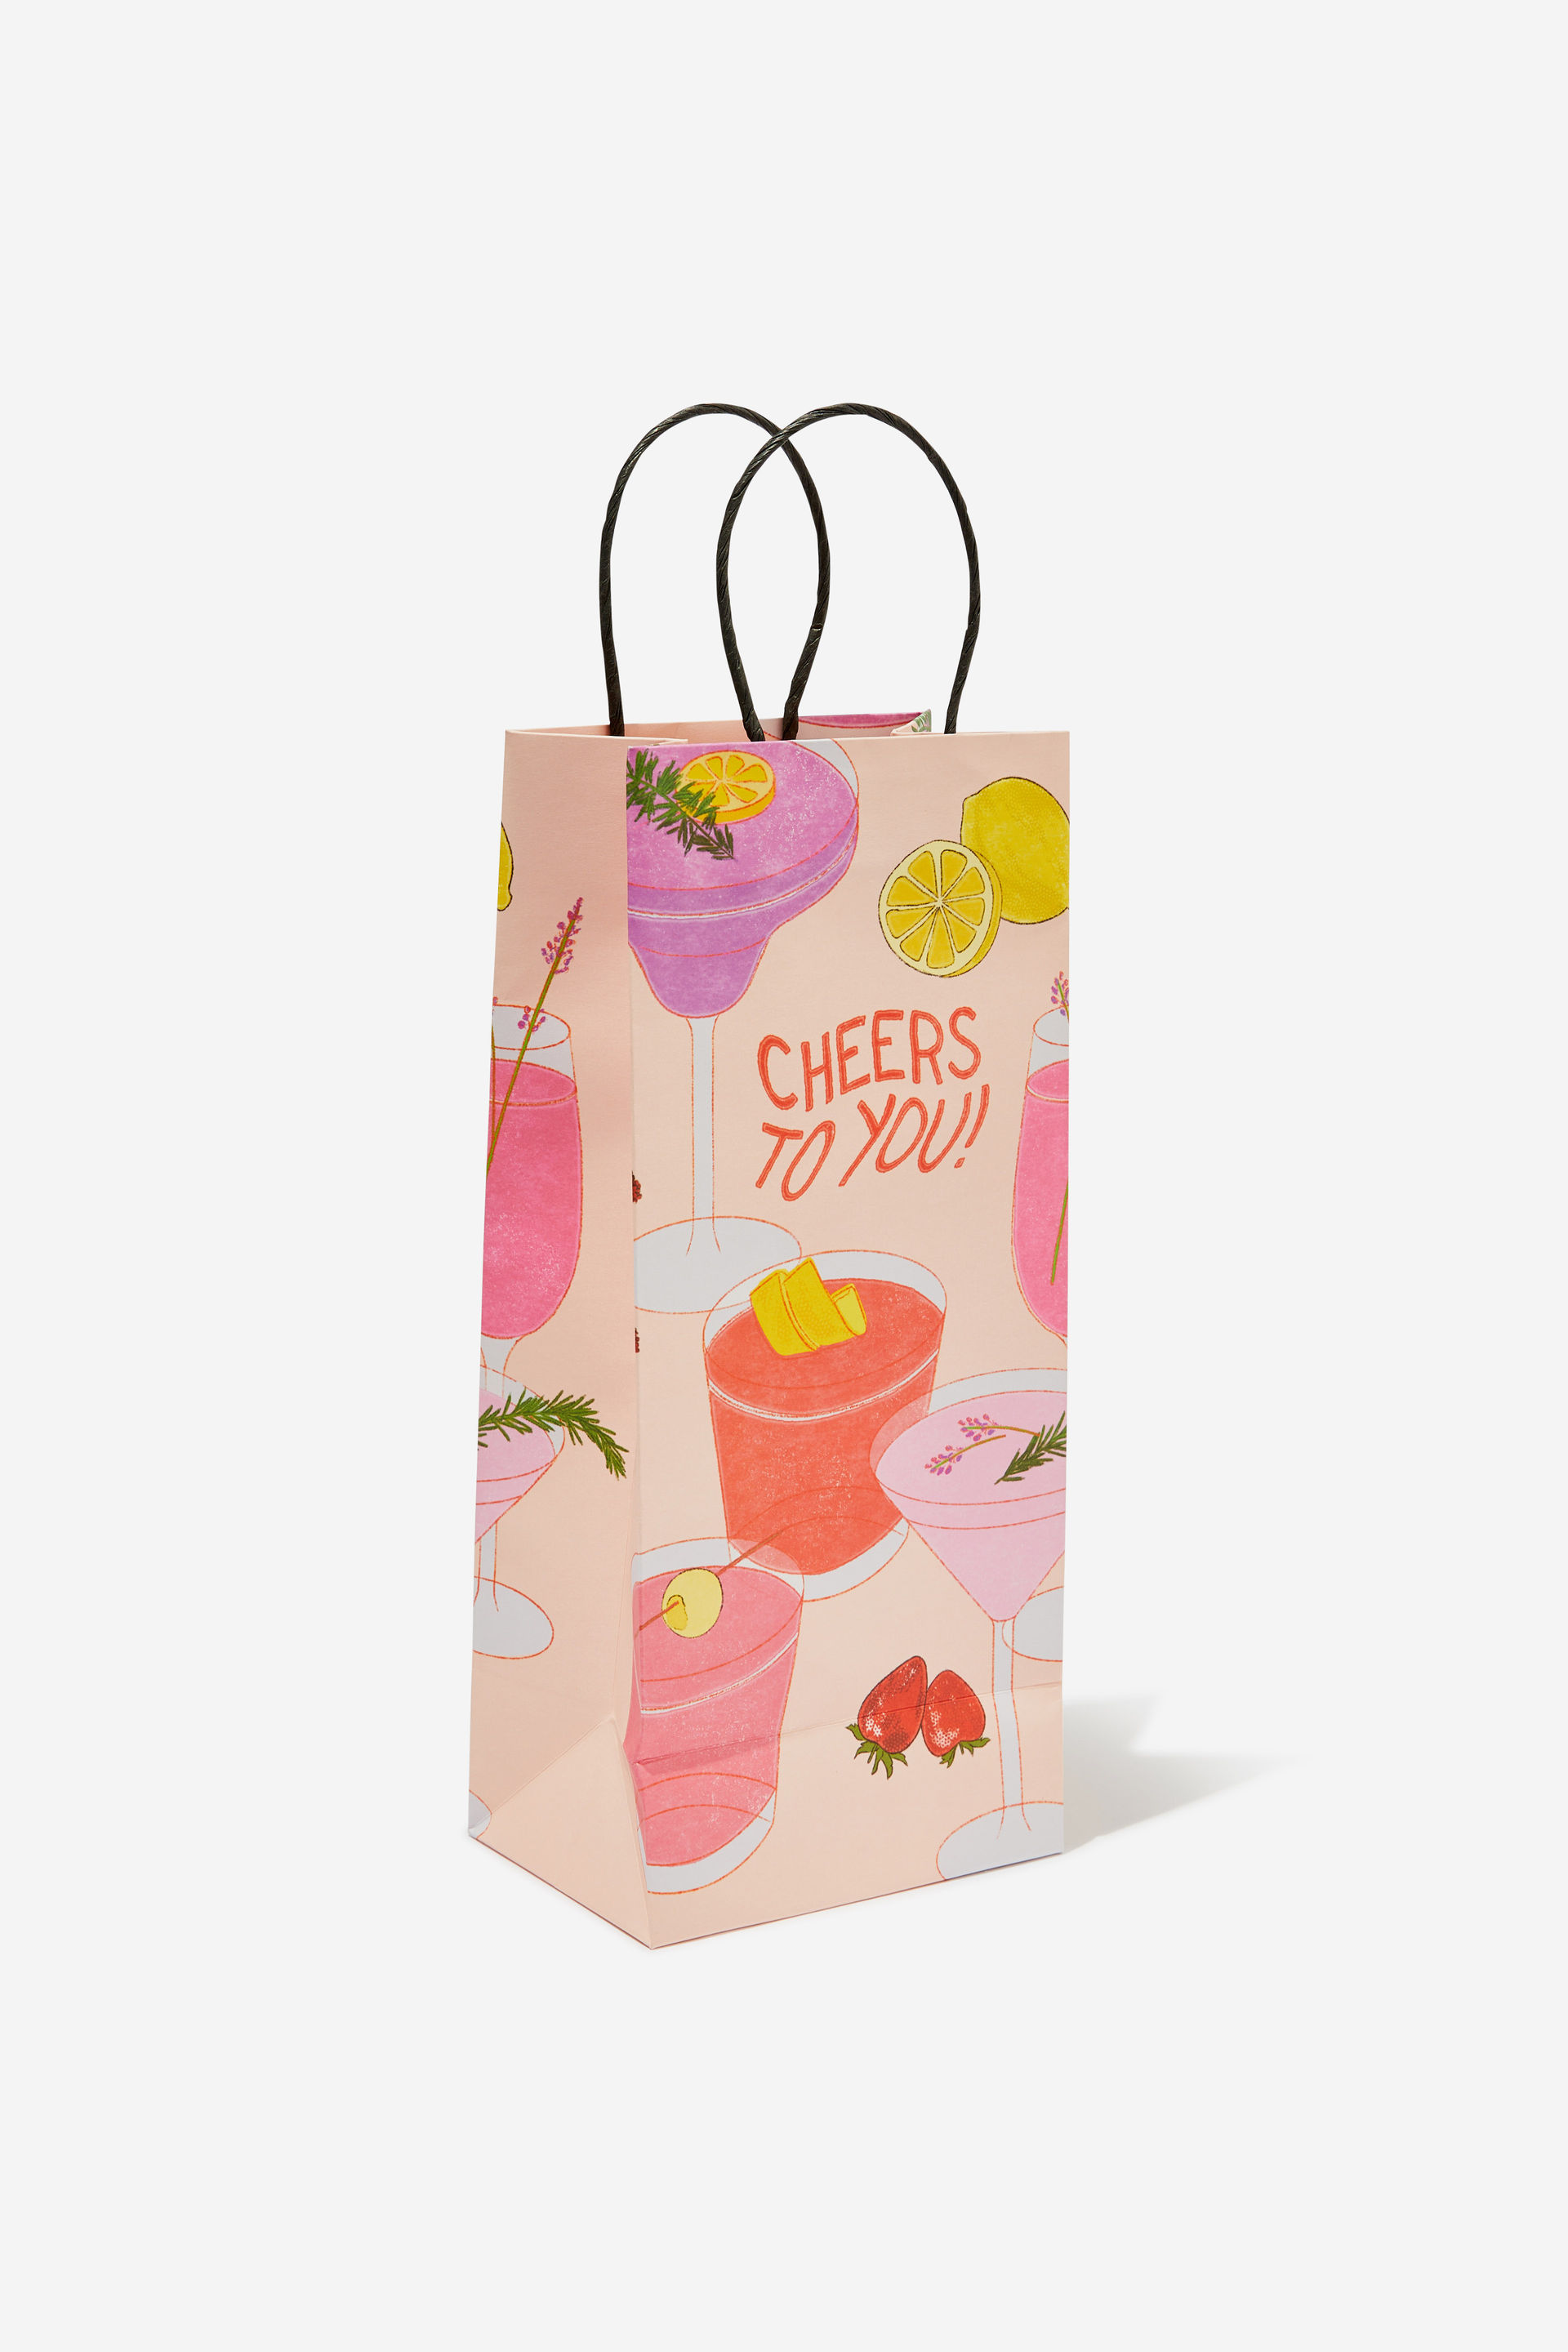 Typo - Bottle Gift Bag - Cheers to you drinks!